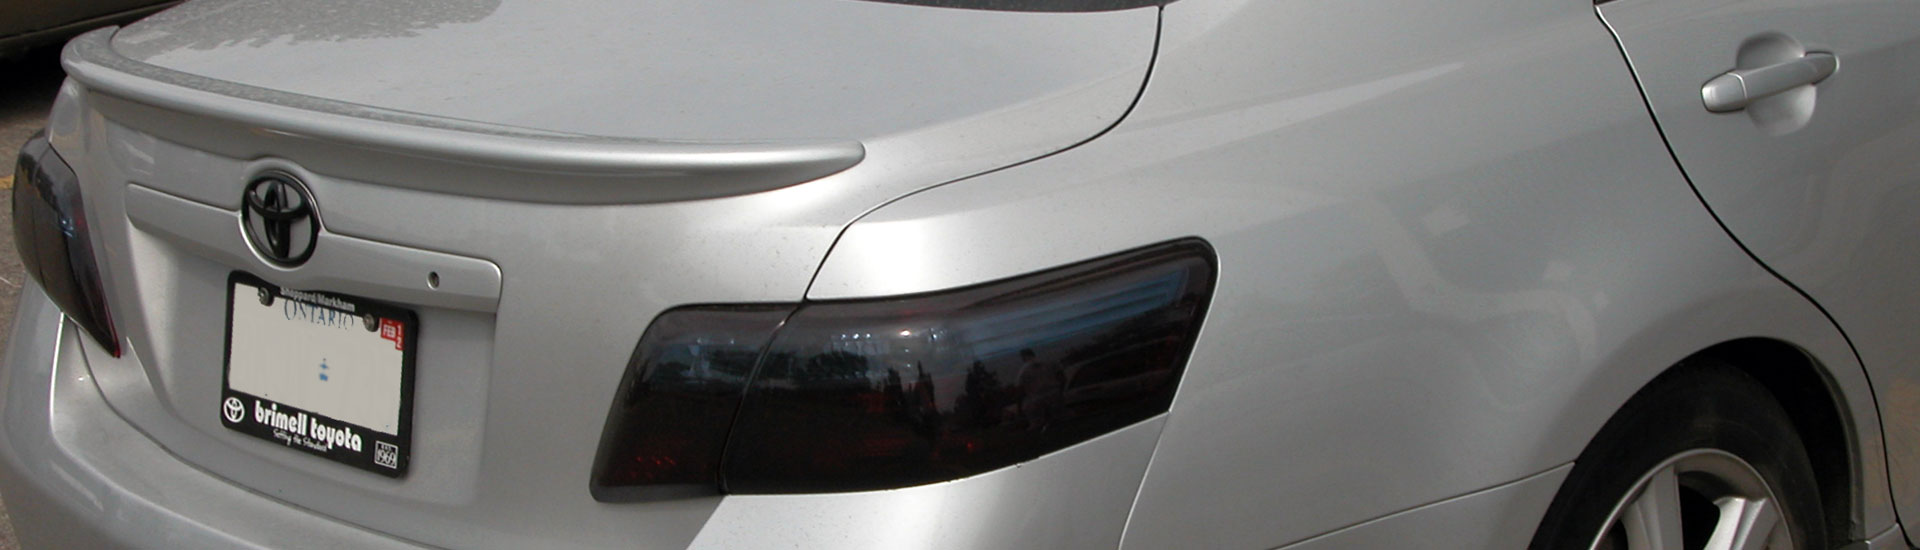 Toyota Tail Light Tint Covers